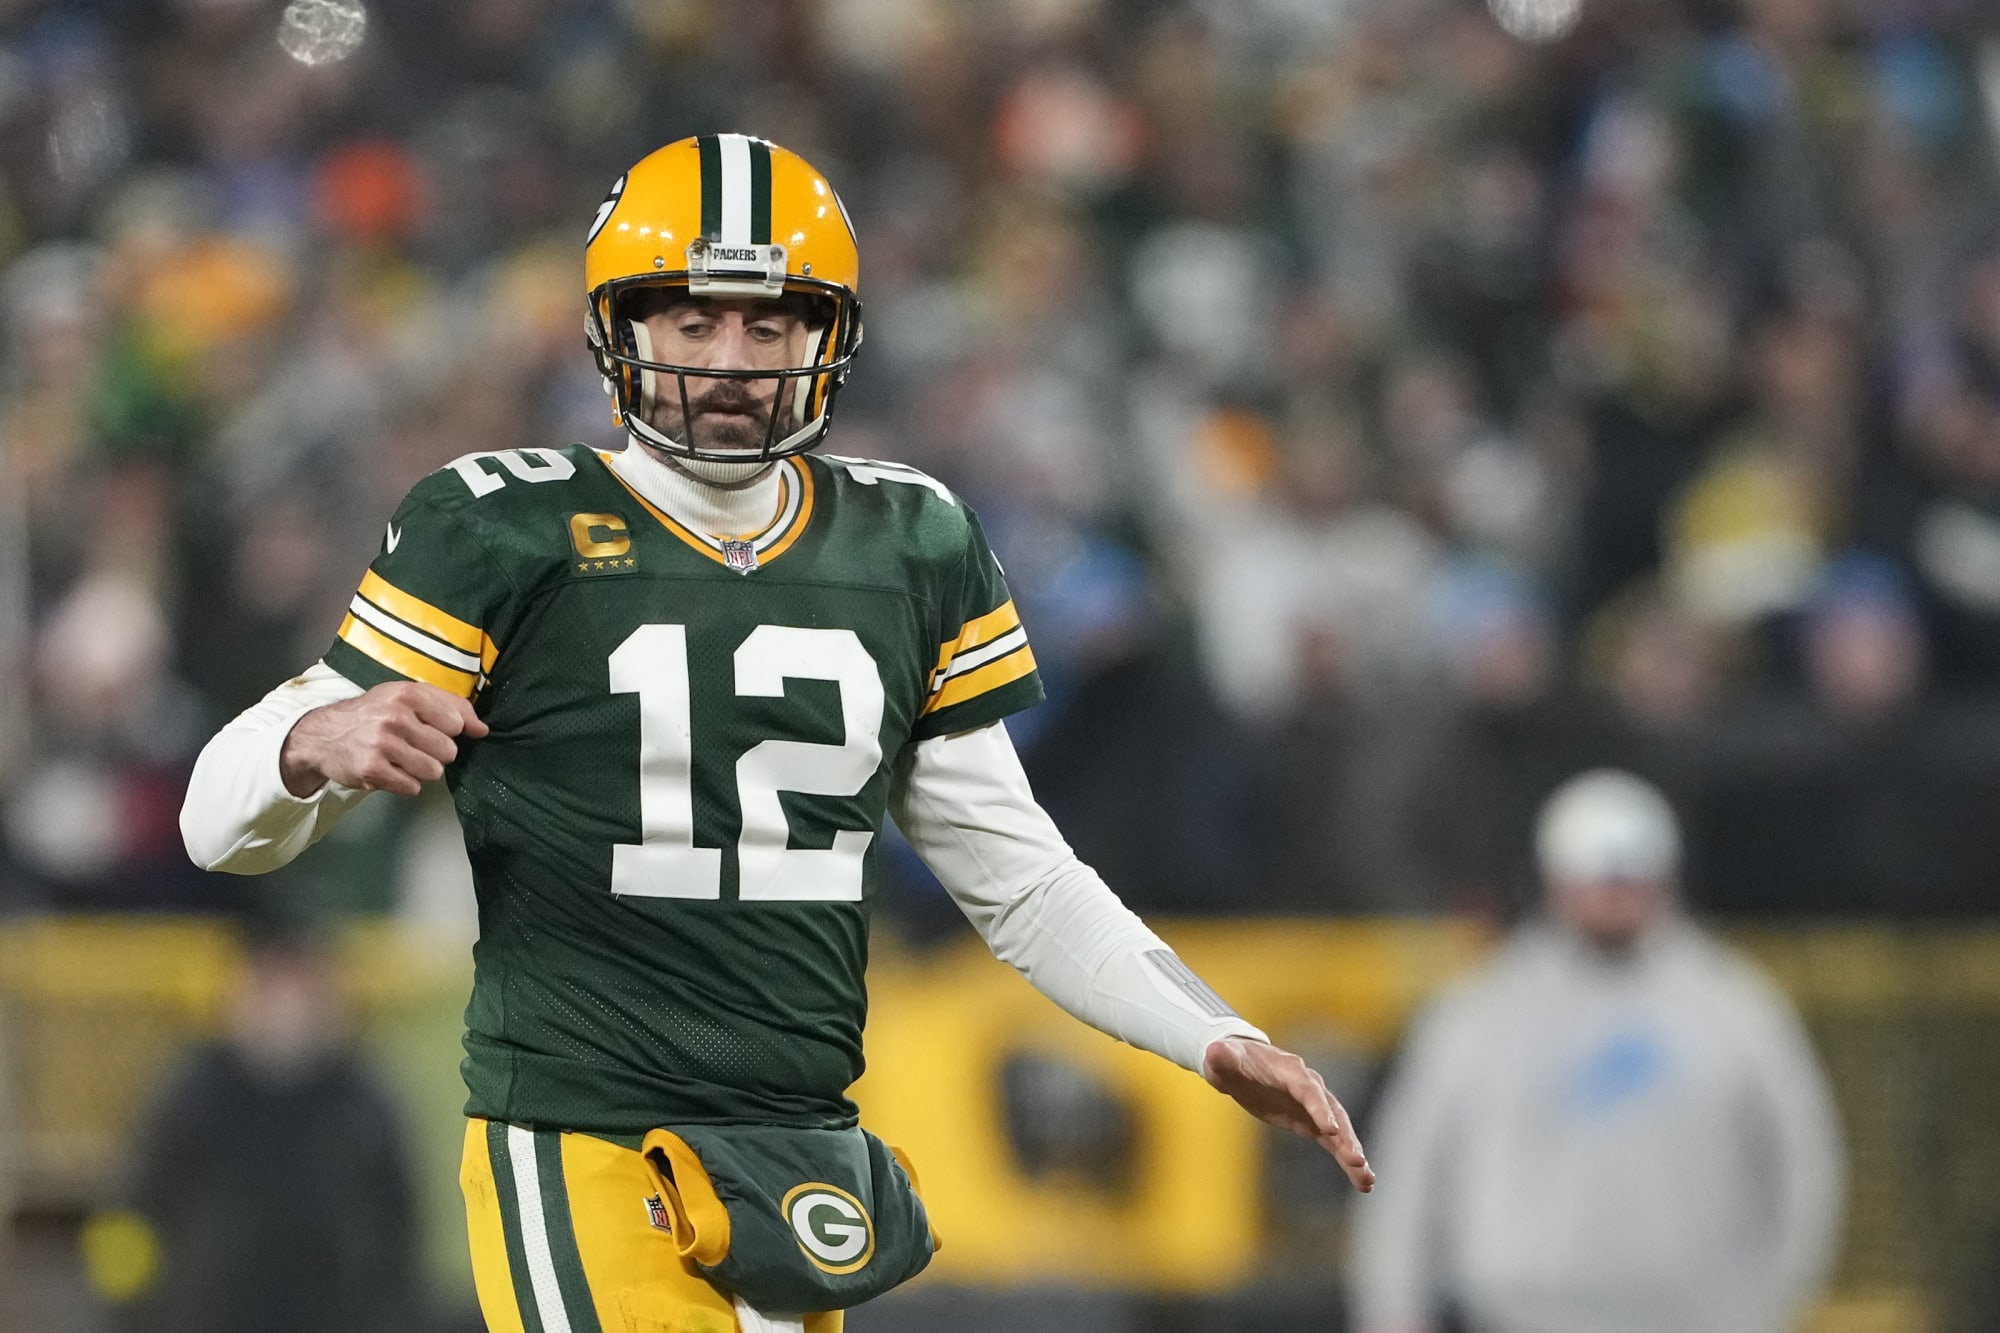 Mike Greenberg went nuclear on Jets over Aaron Rodgers trade debacle